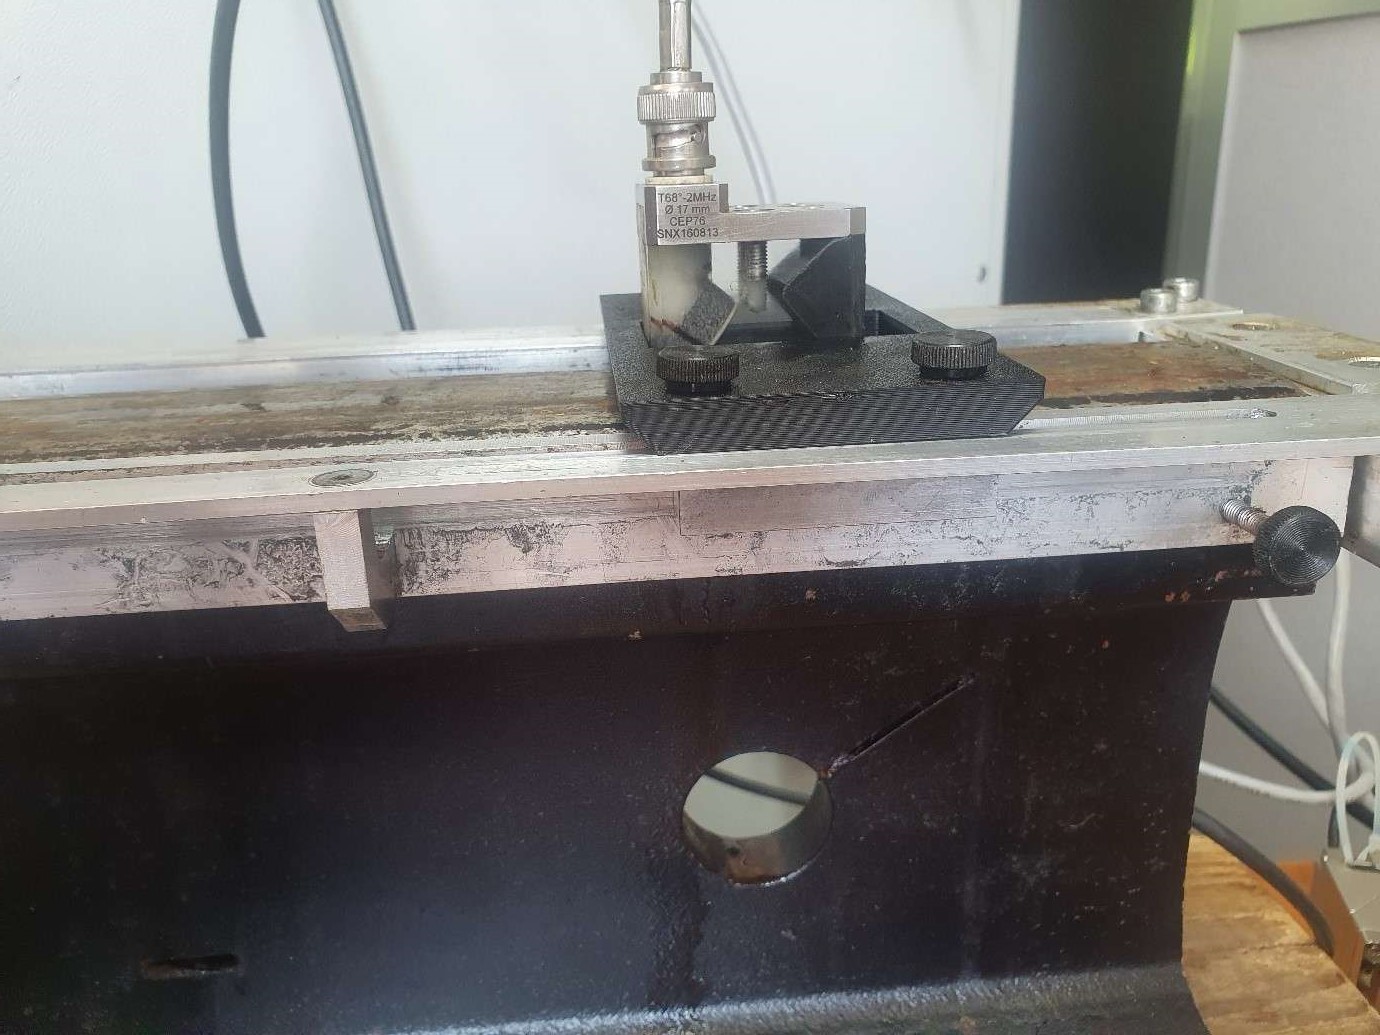 Ultrasonic probe inspecting rail for flaw detection